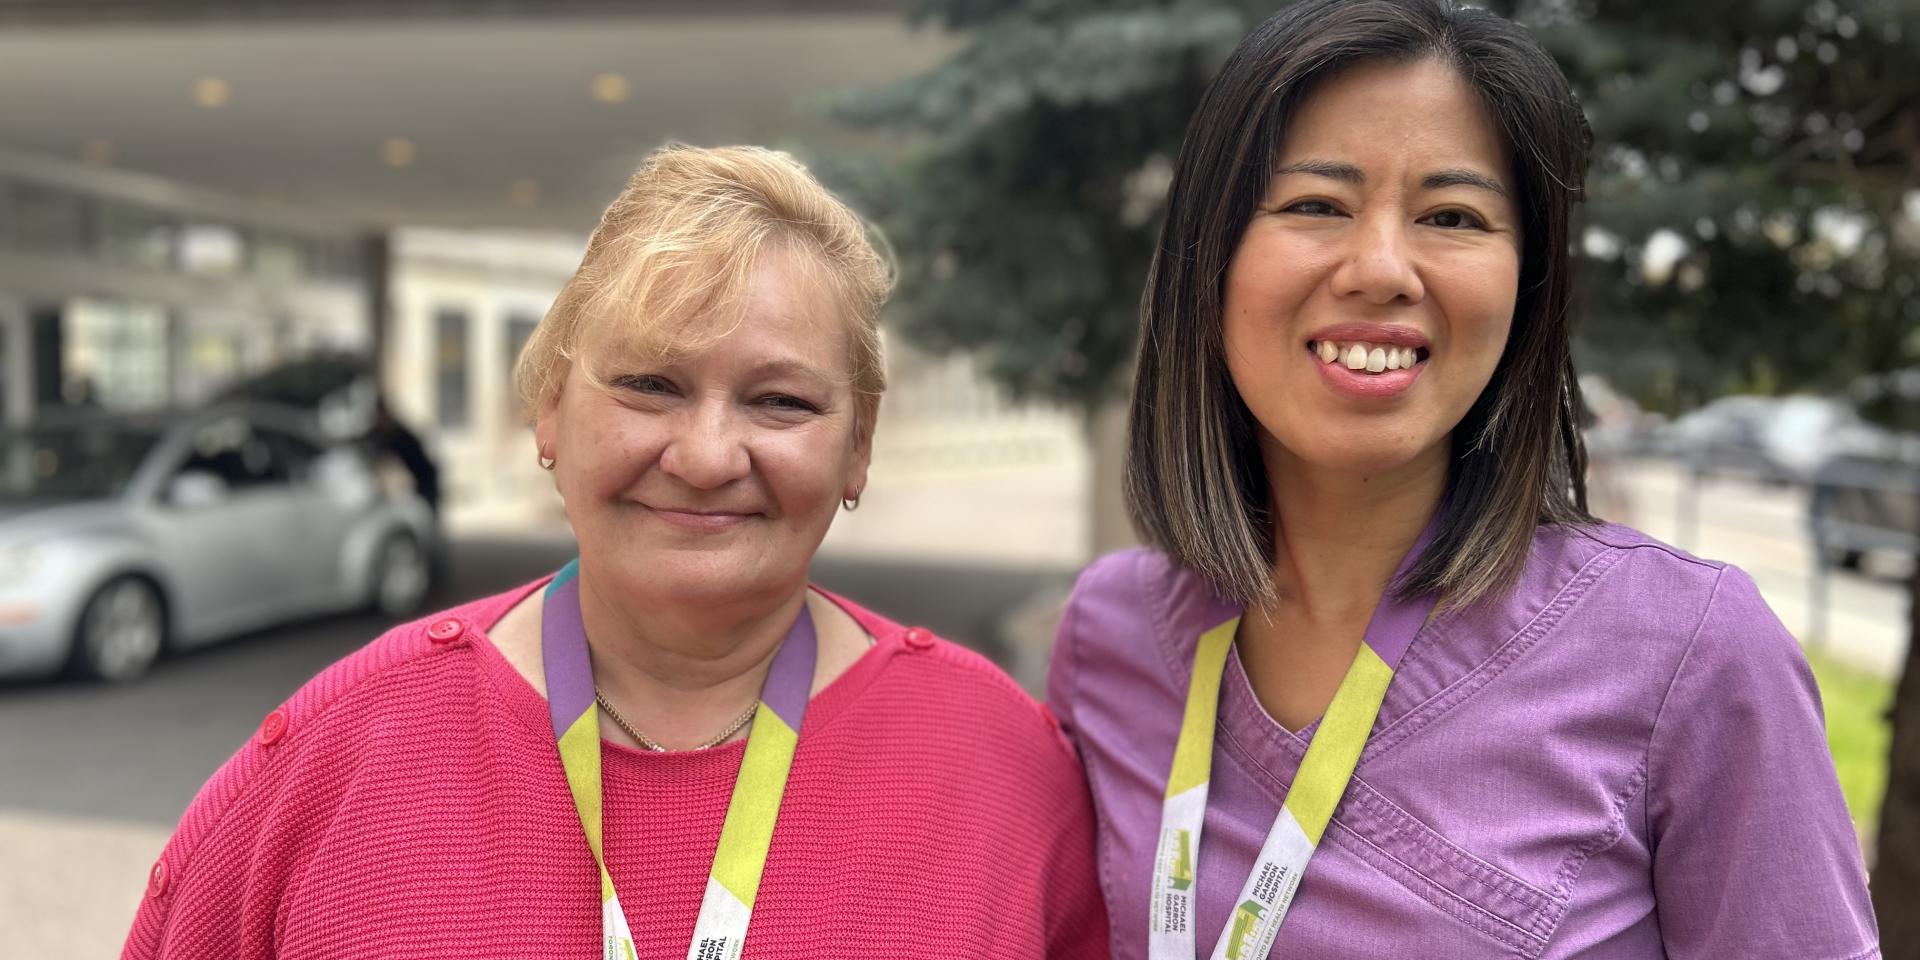 The Tuition Assistance Program is helping RPNs Svetlana Prajer and Christine Lee advance their training.